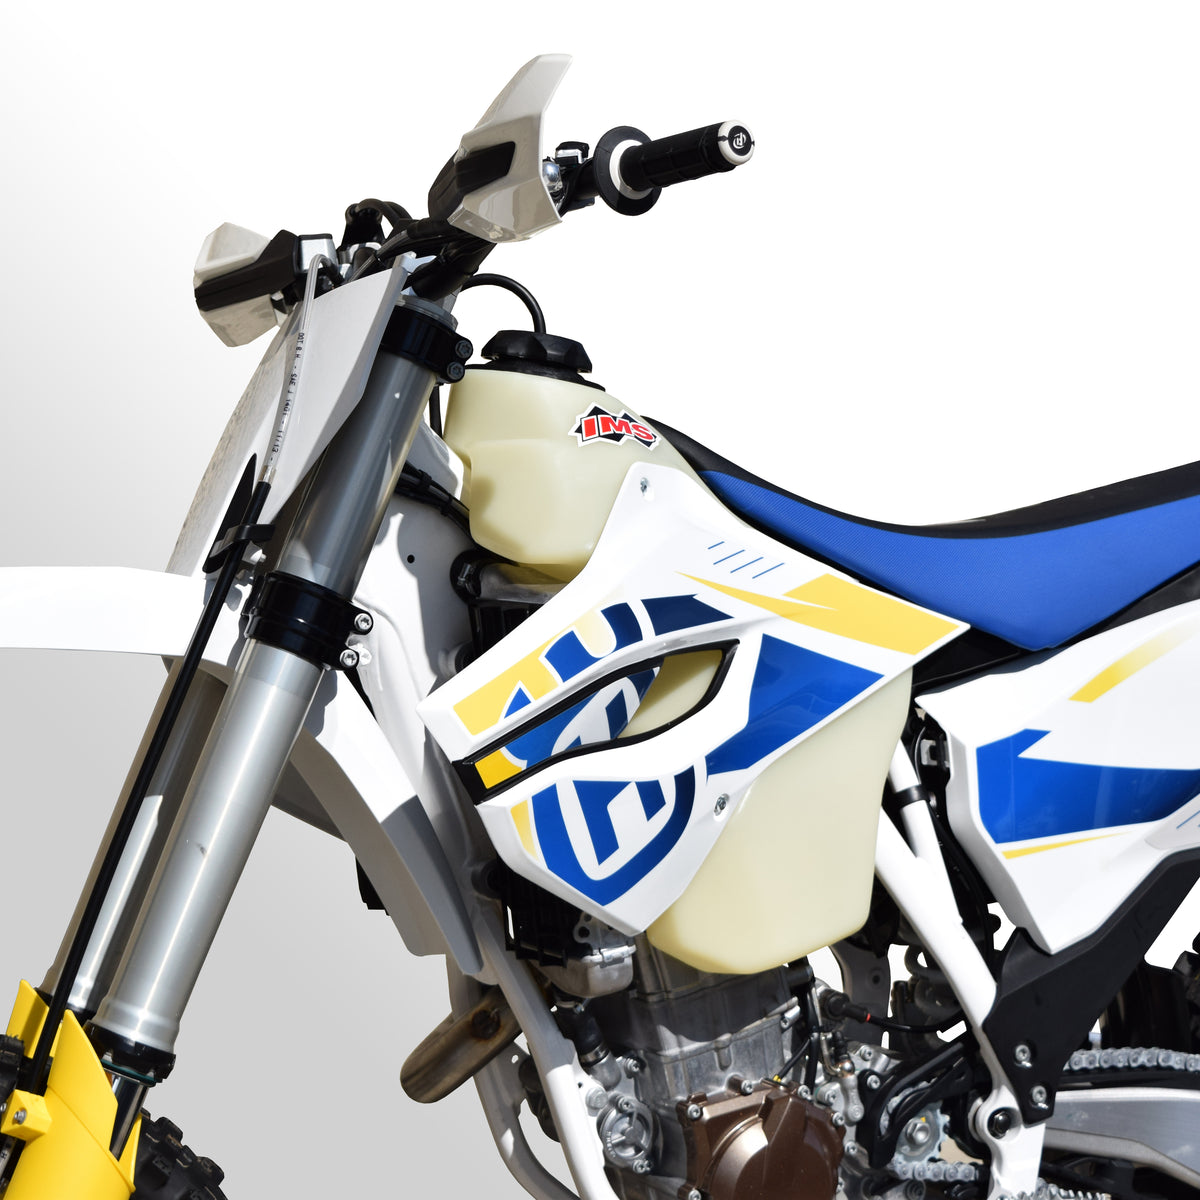 IMS Launches 2.5 Gallon Auxiliary Front Tanks for Husqvarna 701